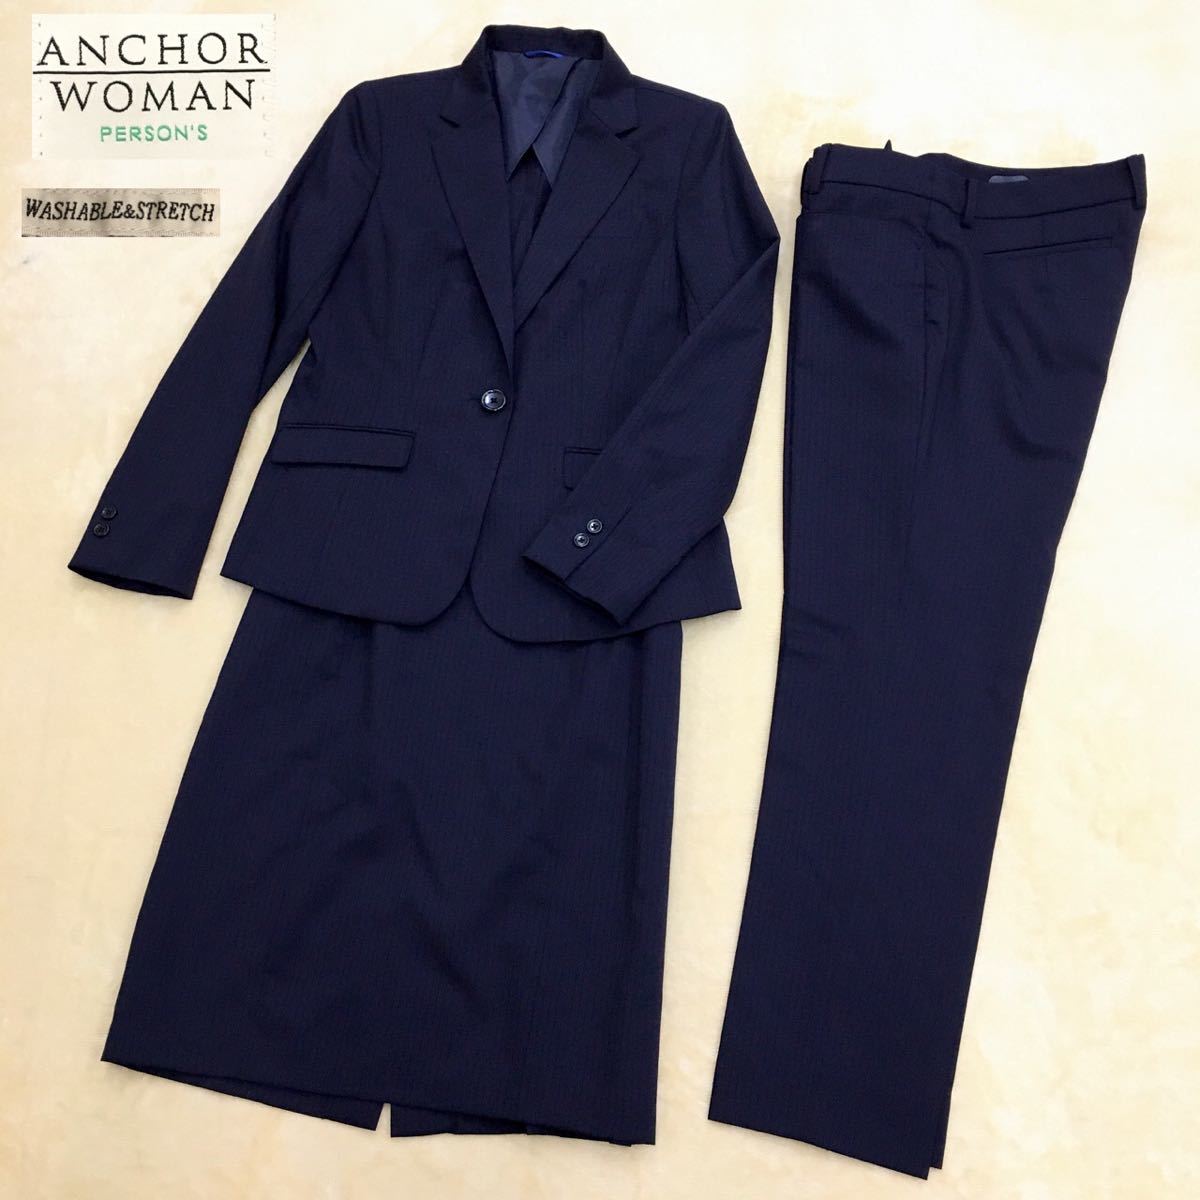  anchor u- man Person's washer bru stretch suit 3 point set jacket tapered pants skirt shadow stripe 13 number 